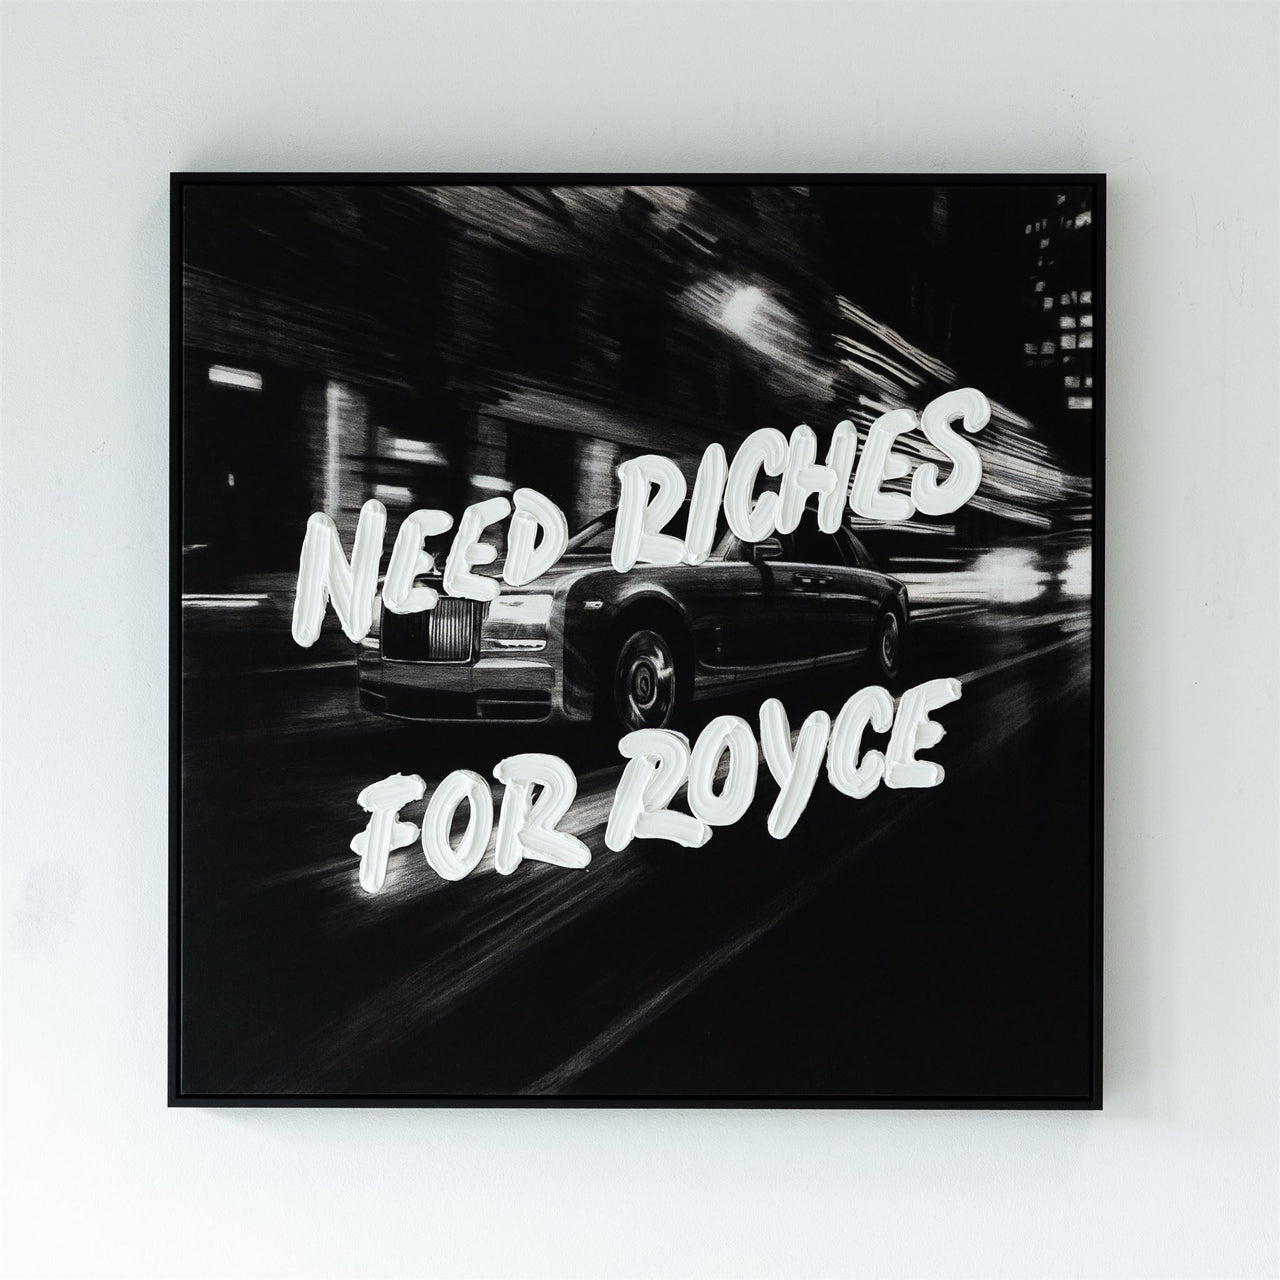 NEED RICHES FOR ROYCE PRINT